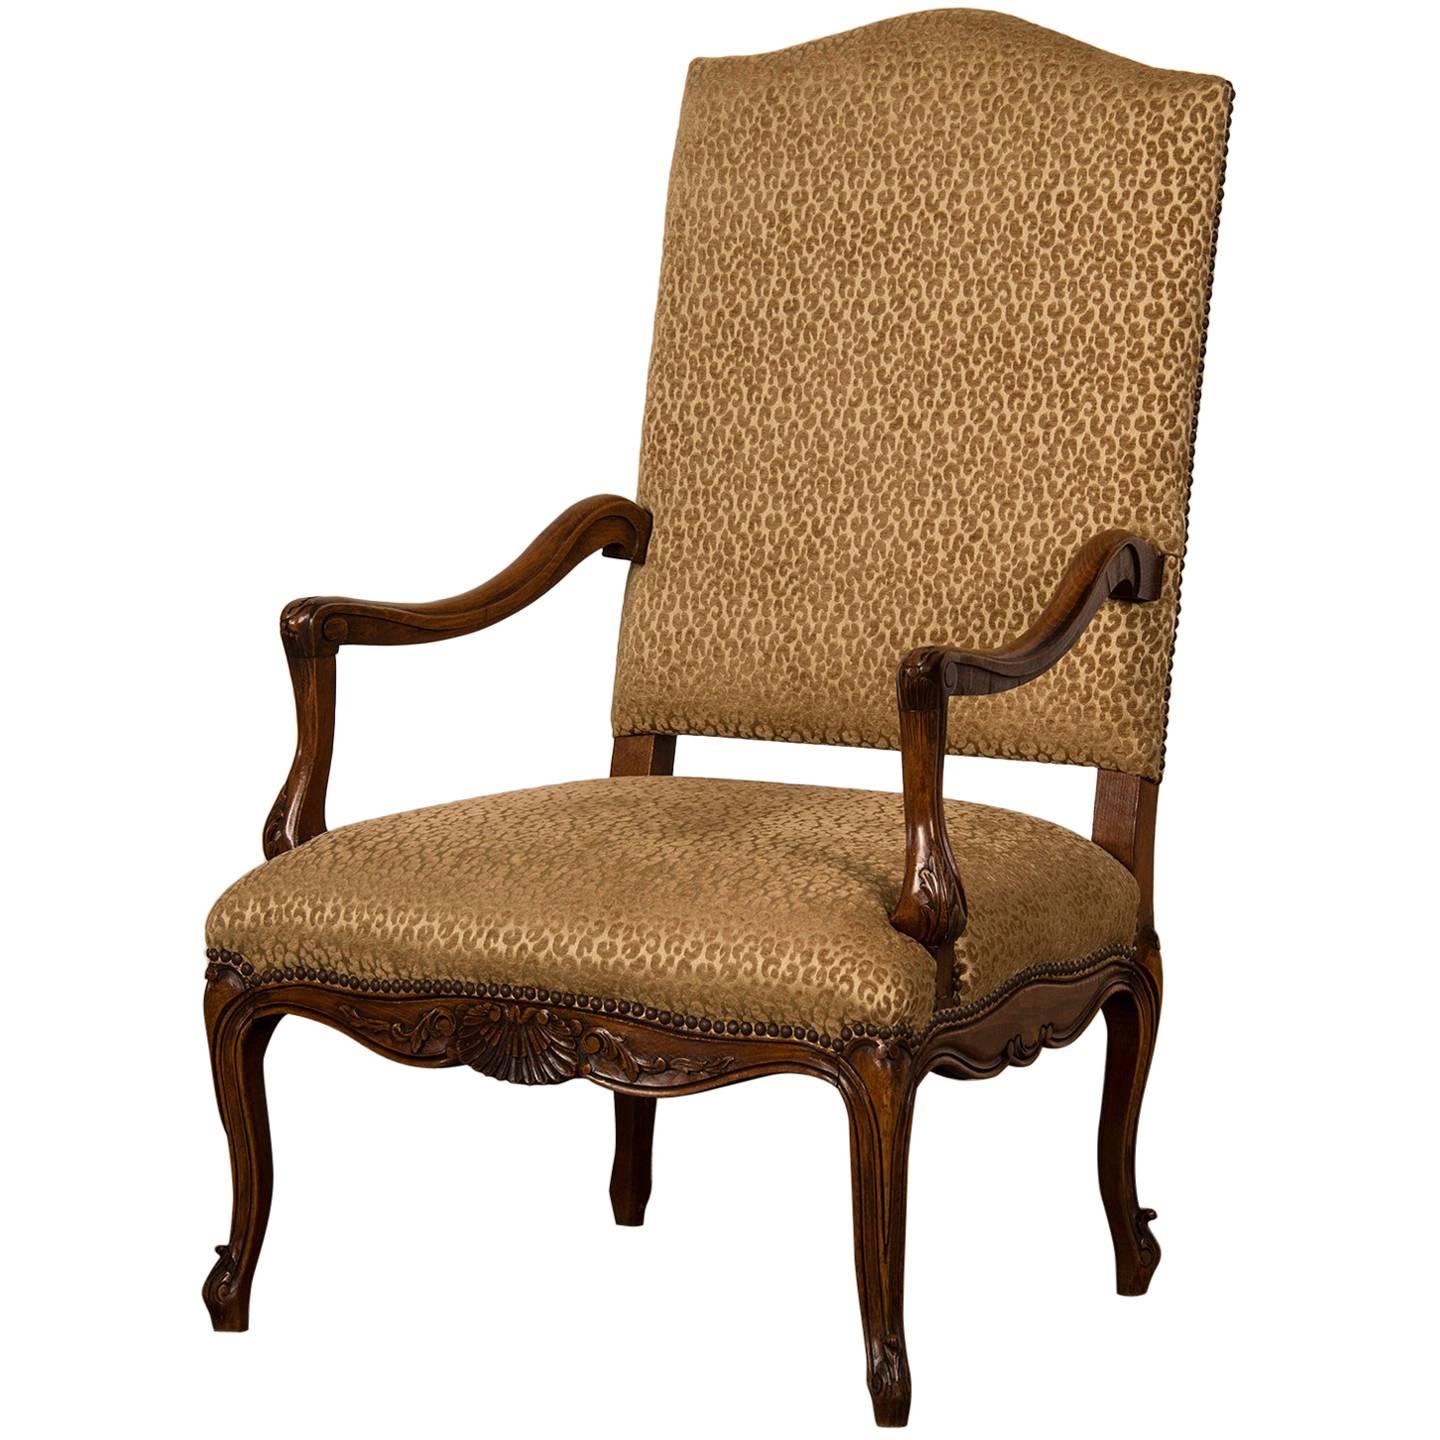 Antique French Louis XV Style Walnut Armchair ‘Fauteuil’, circa 1880 For Sale